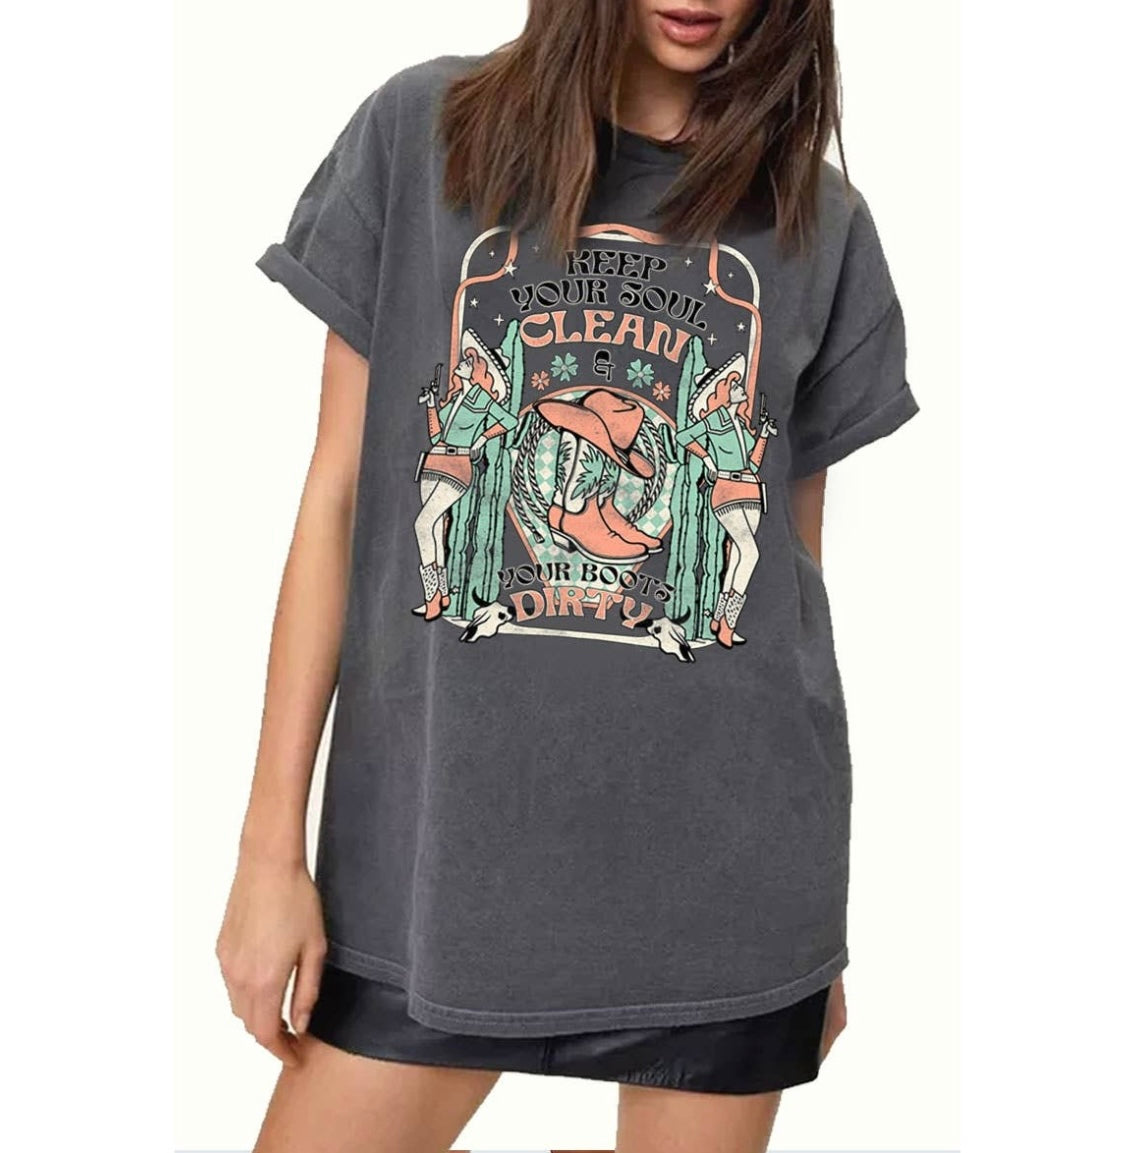 Soul clean/ boots dirty graphic tee